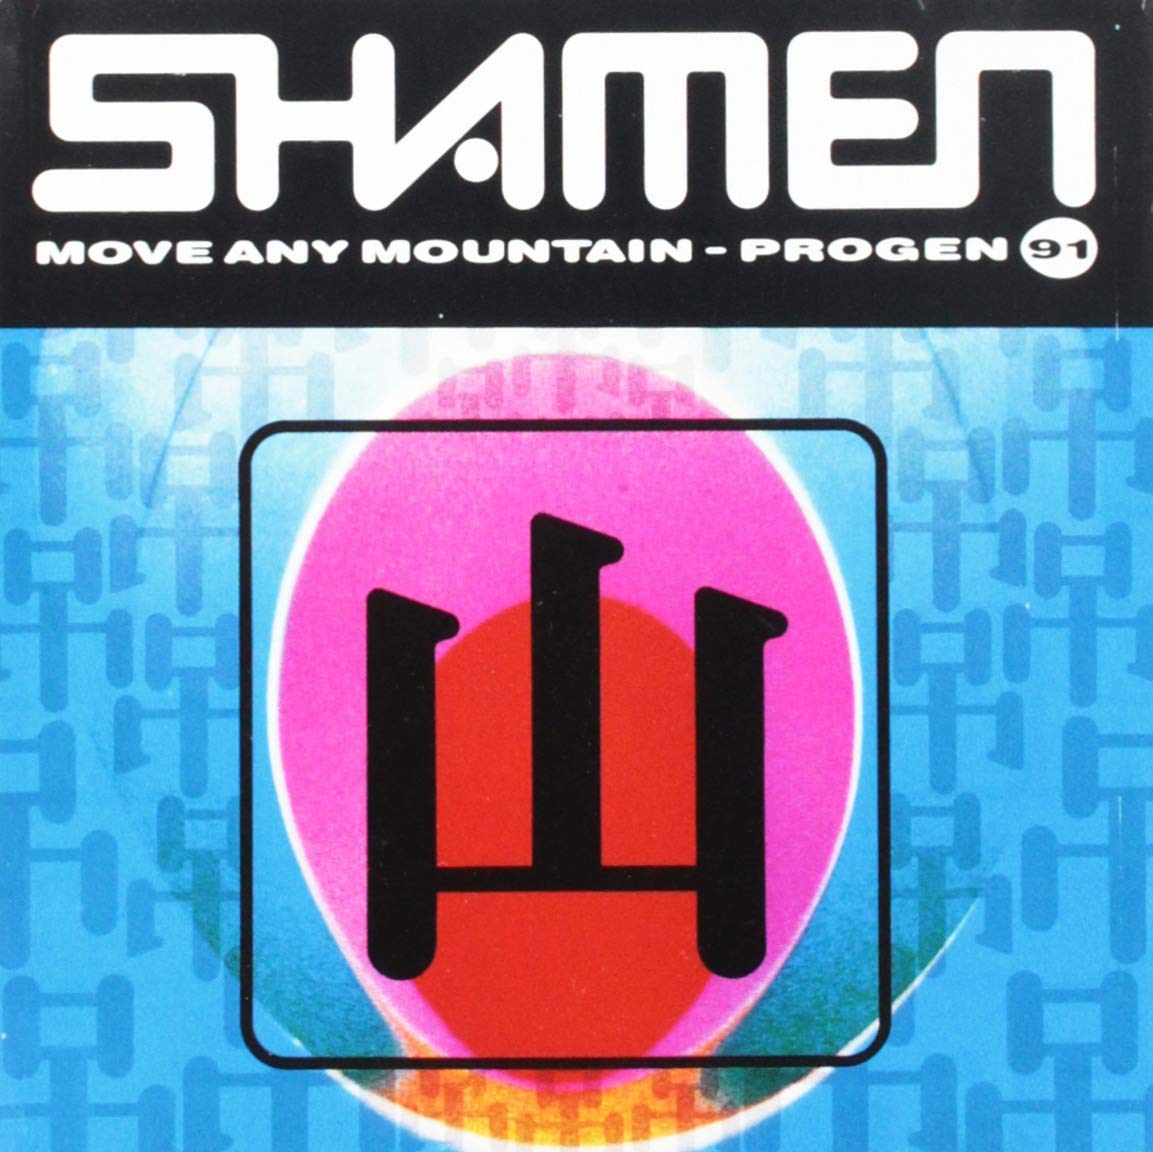 NEWS The Shamen, Moving Any Mountain since 1991! (31 years!)